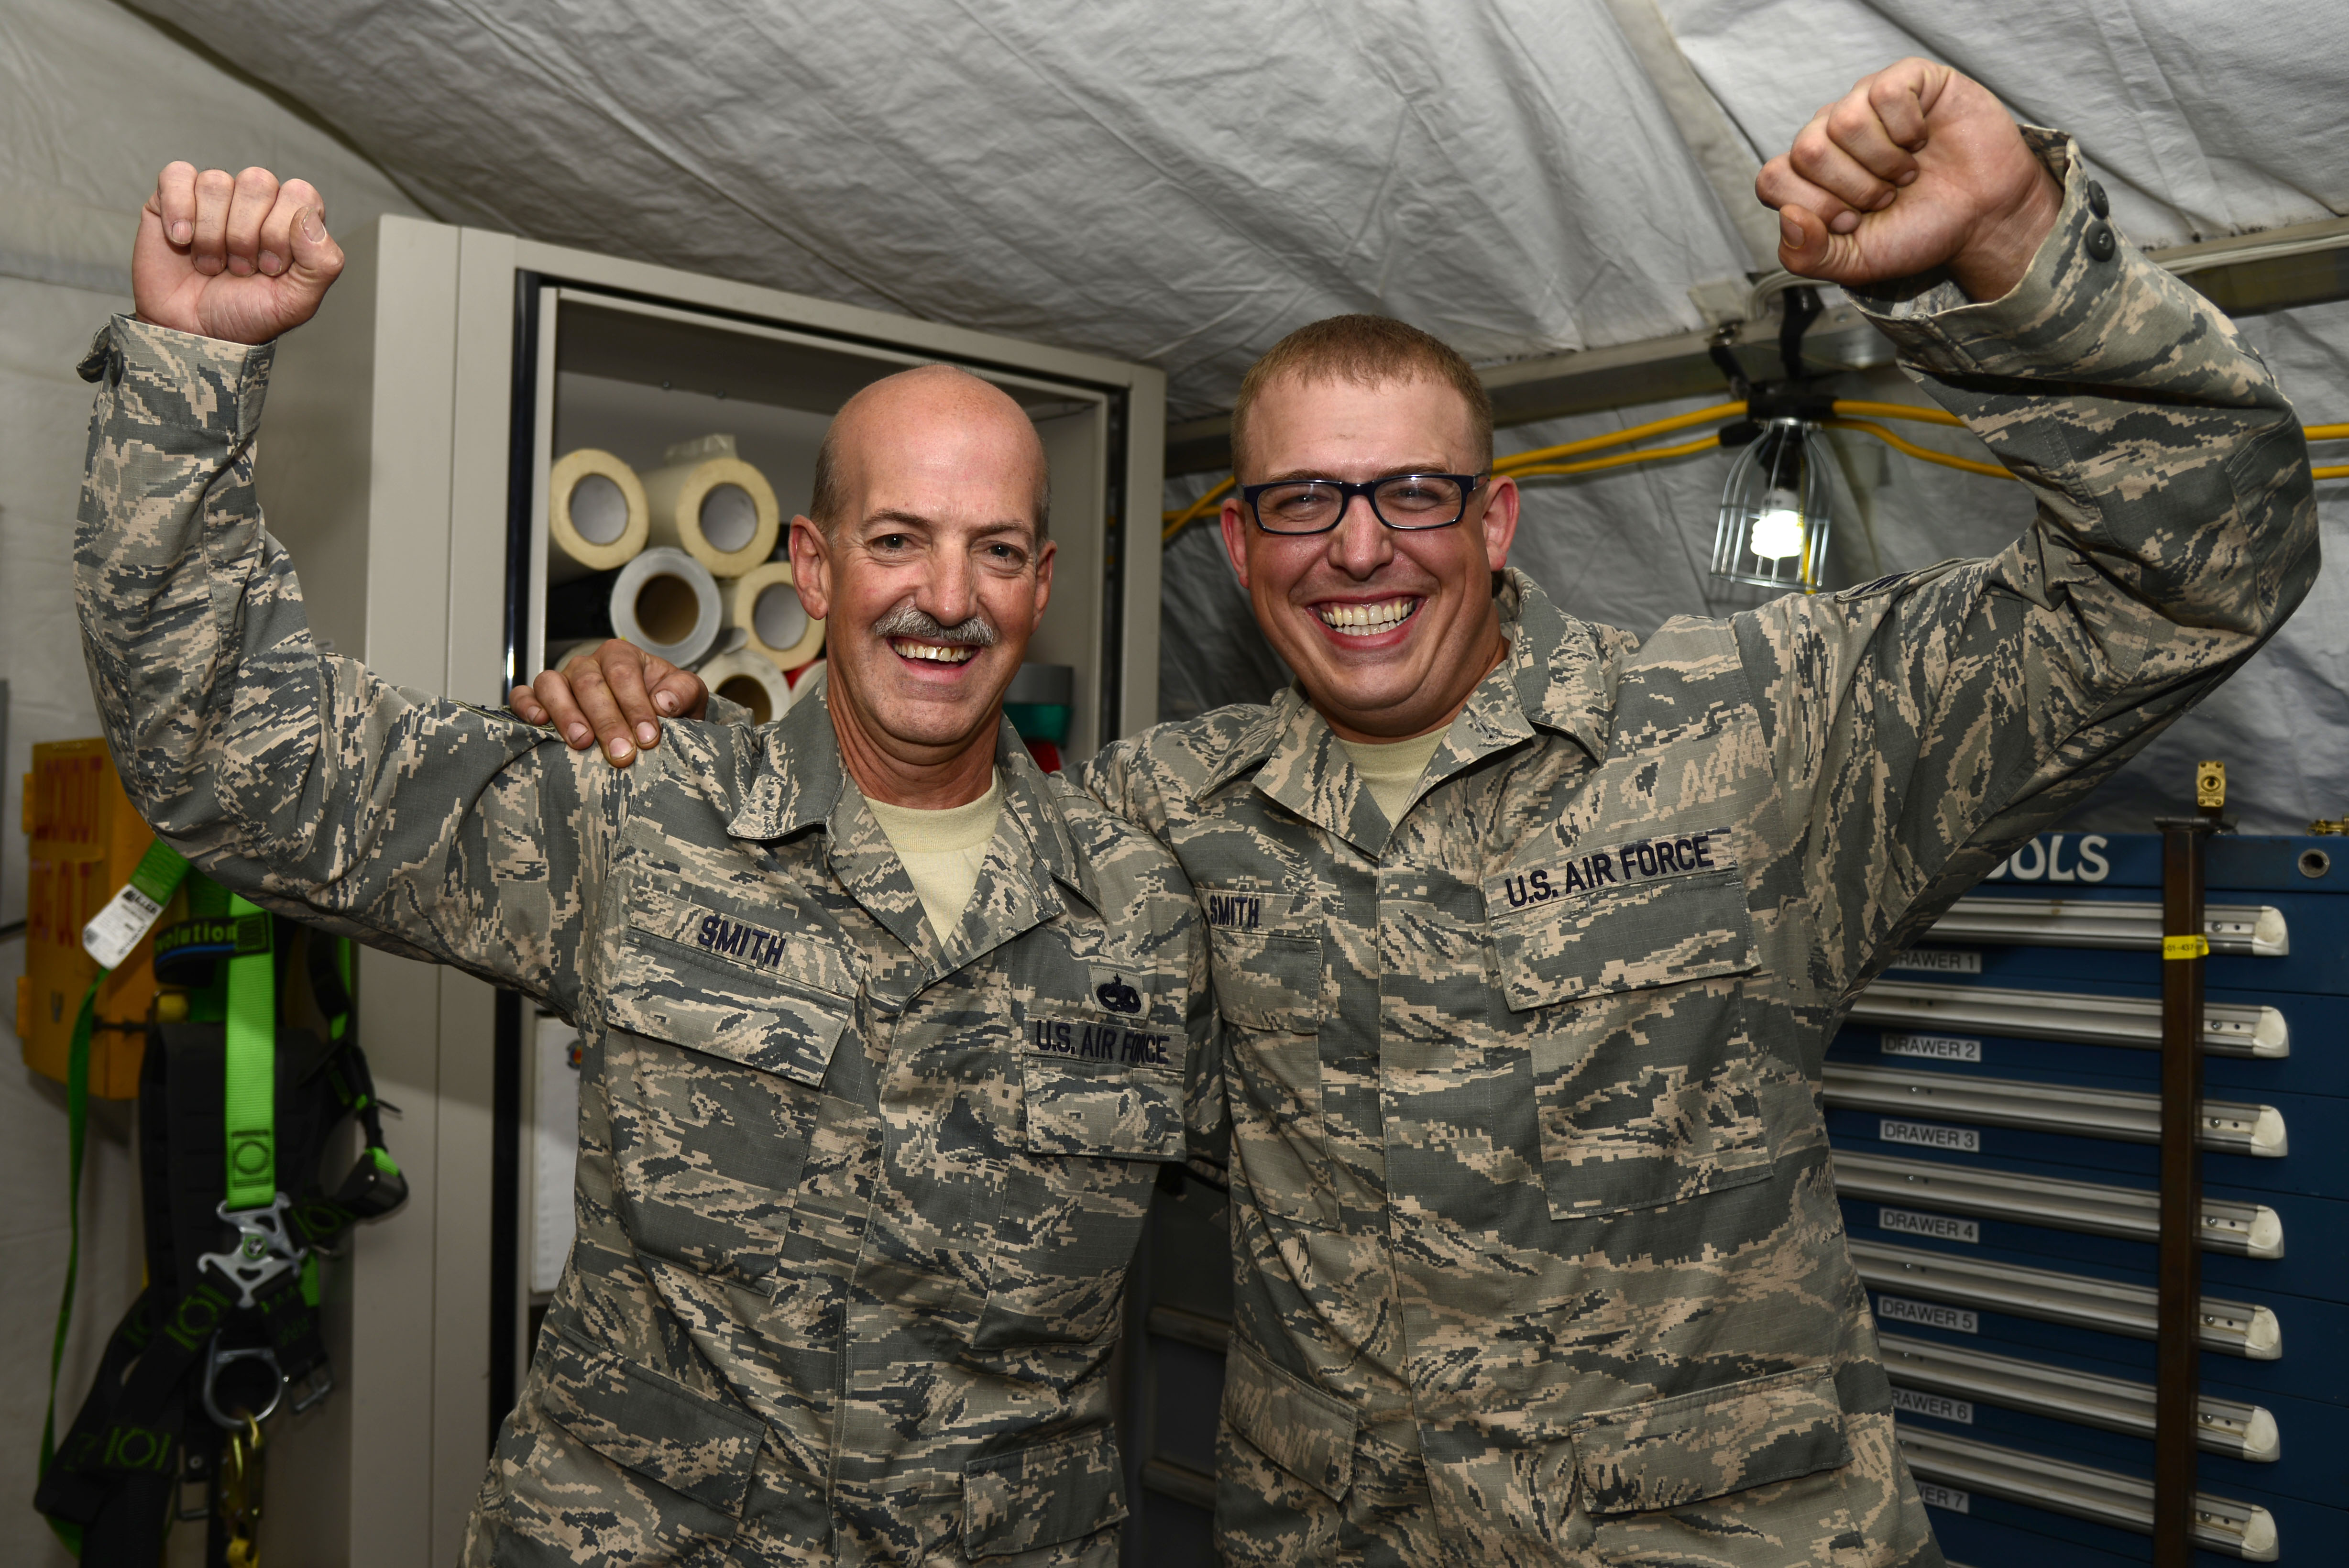 U.S. Air Force photo by Senior Airman Racheal EFather, son spend Fathers Day in